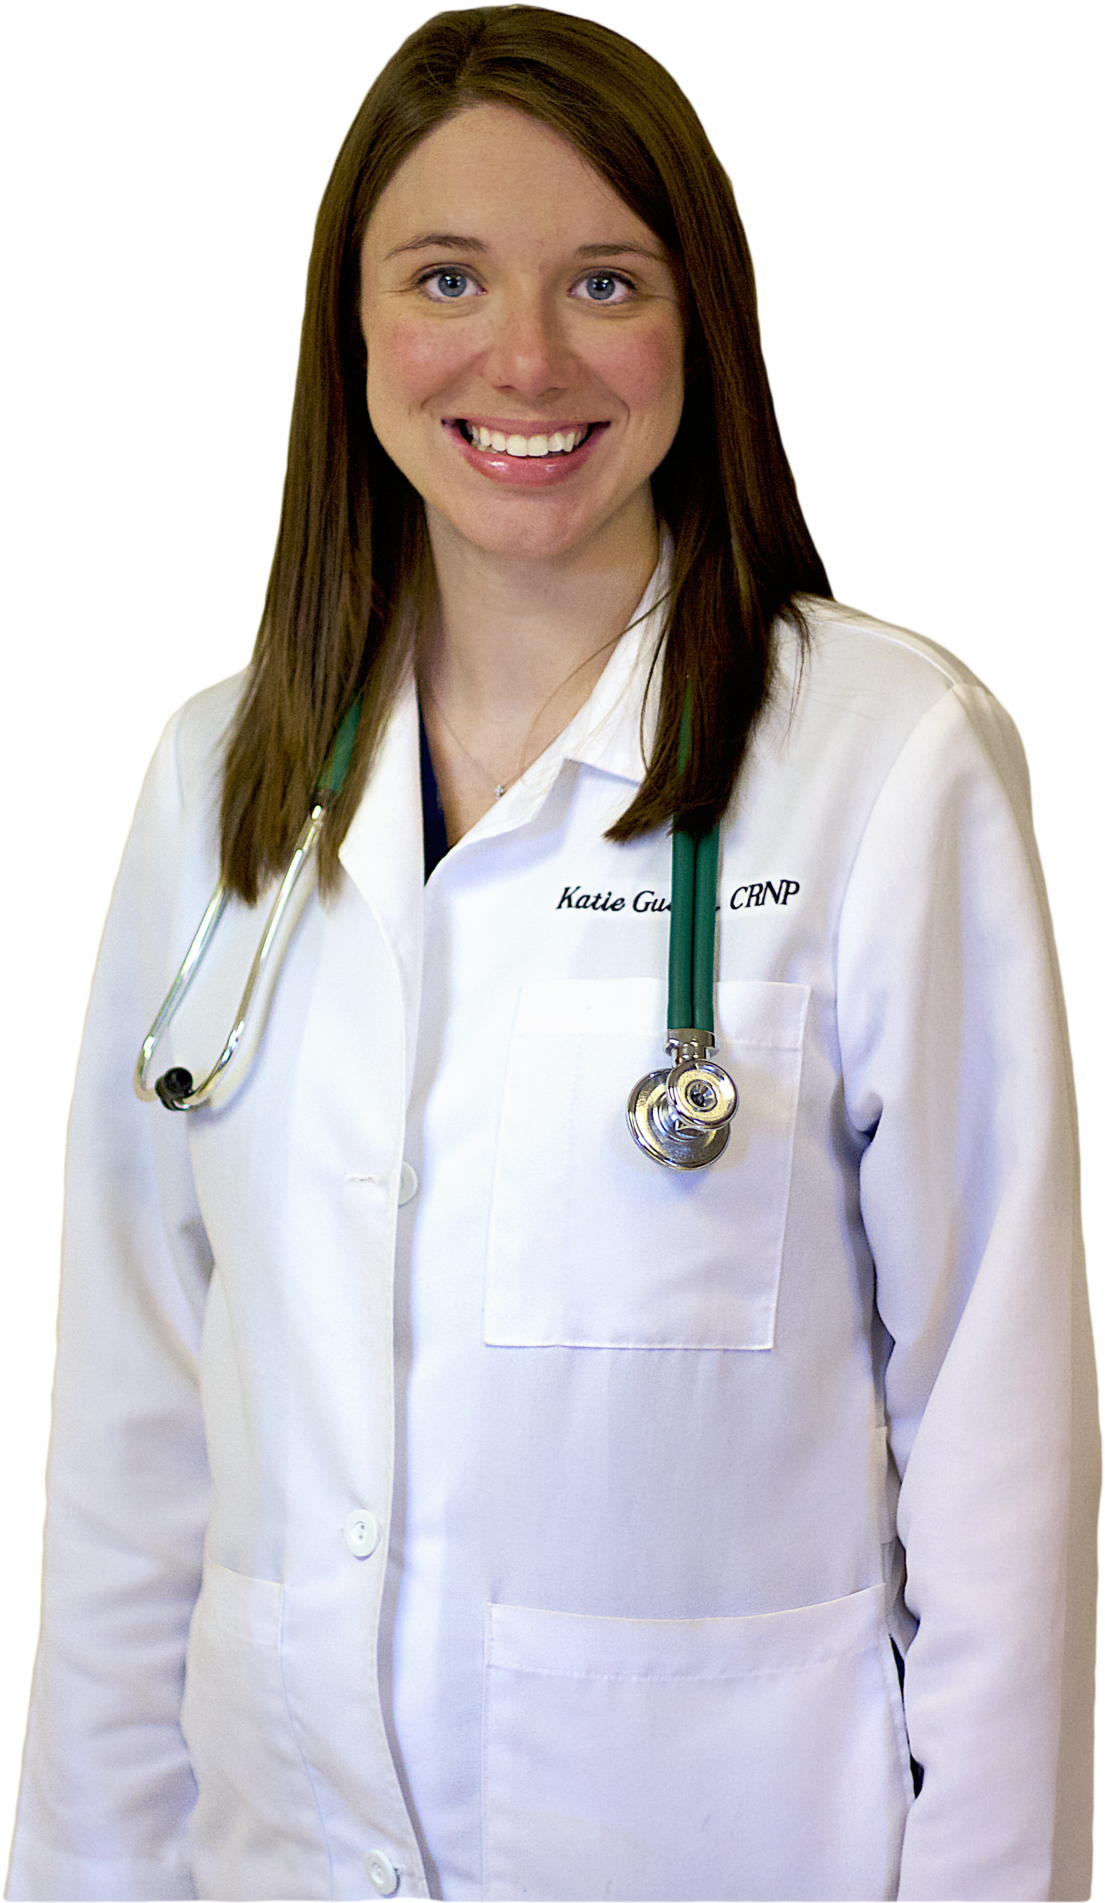 A Woman Wearing A White Lab Coat With A Stethoscope Around Her Neck